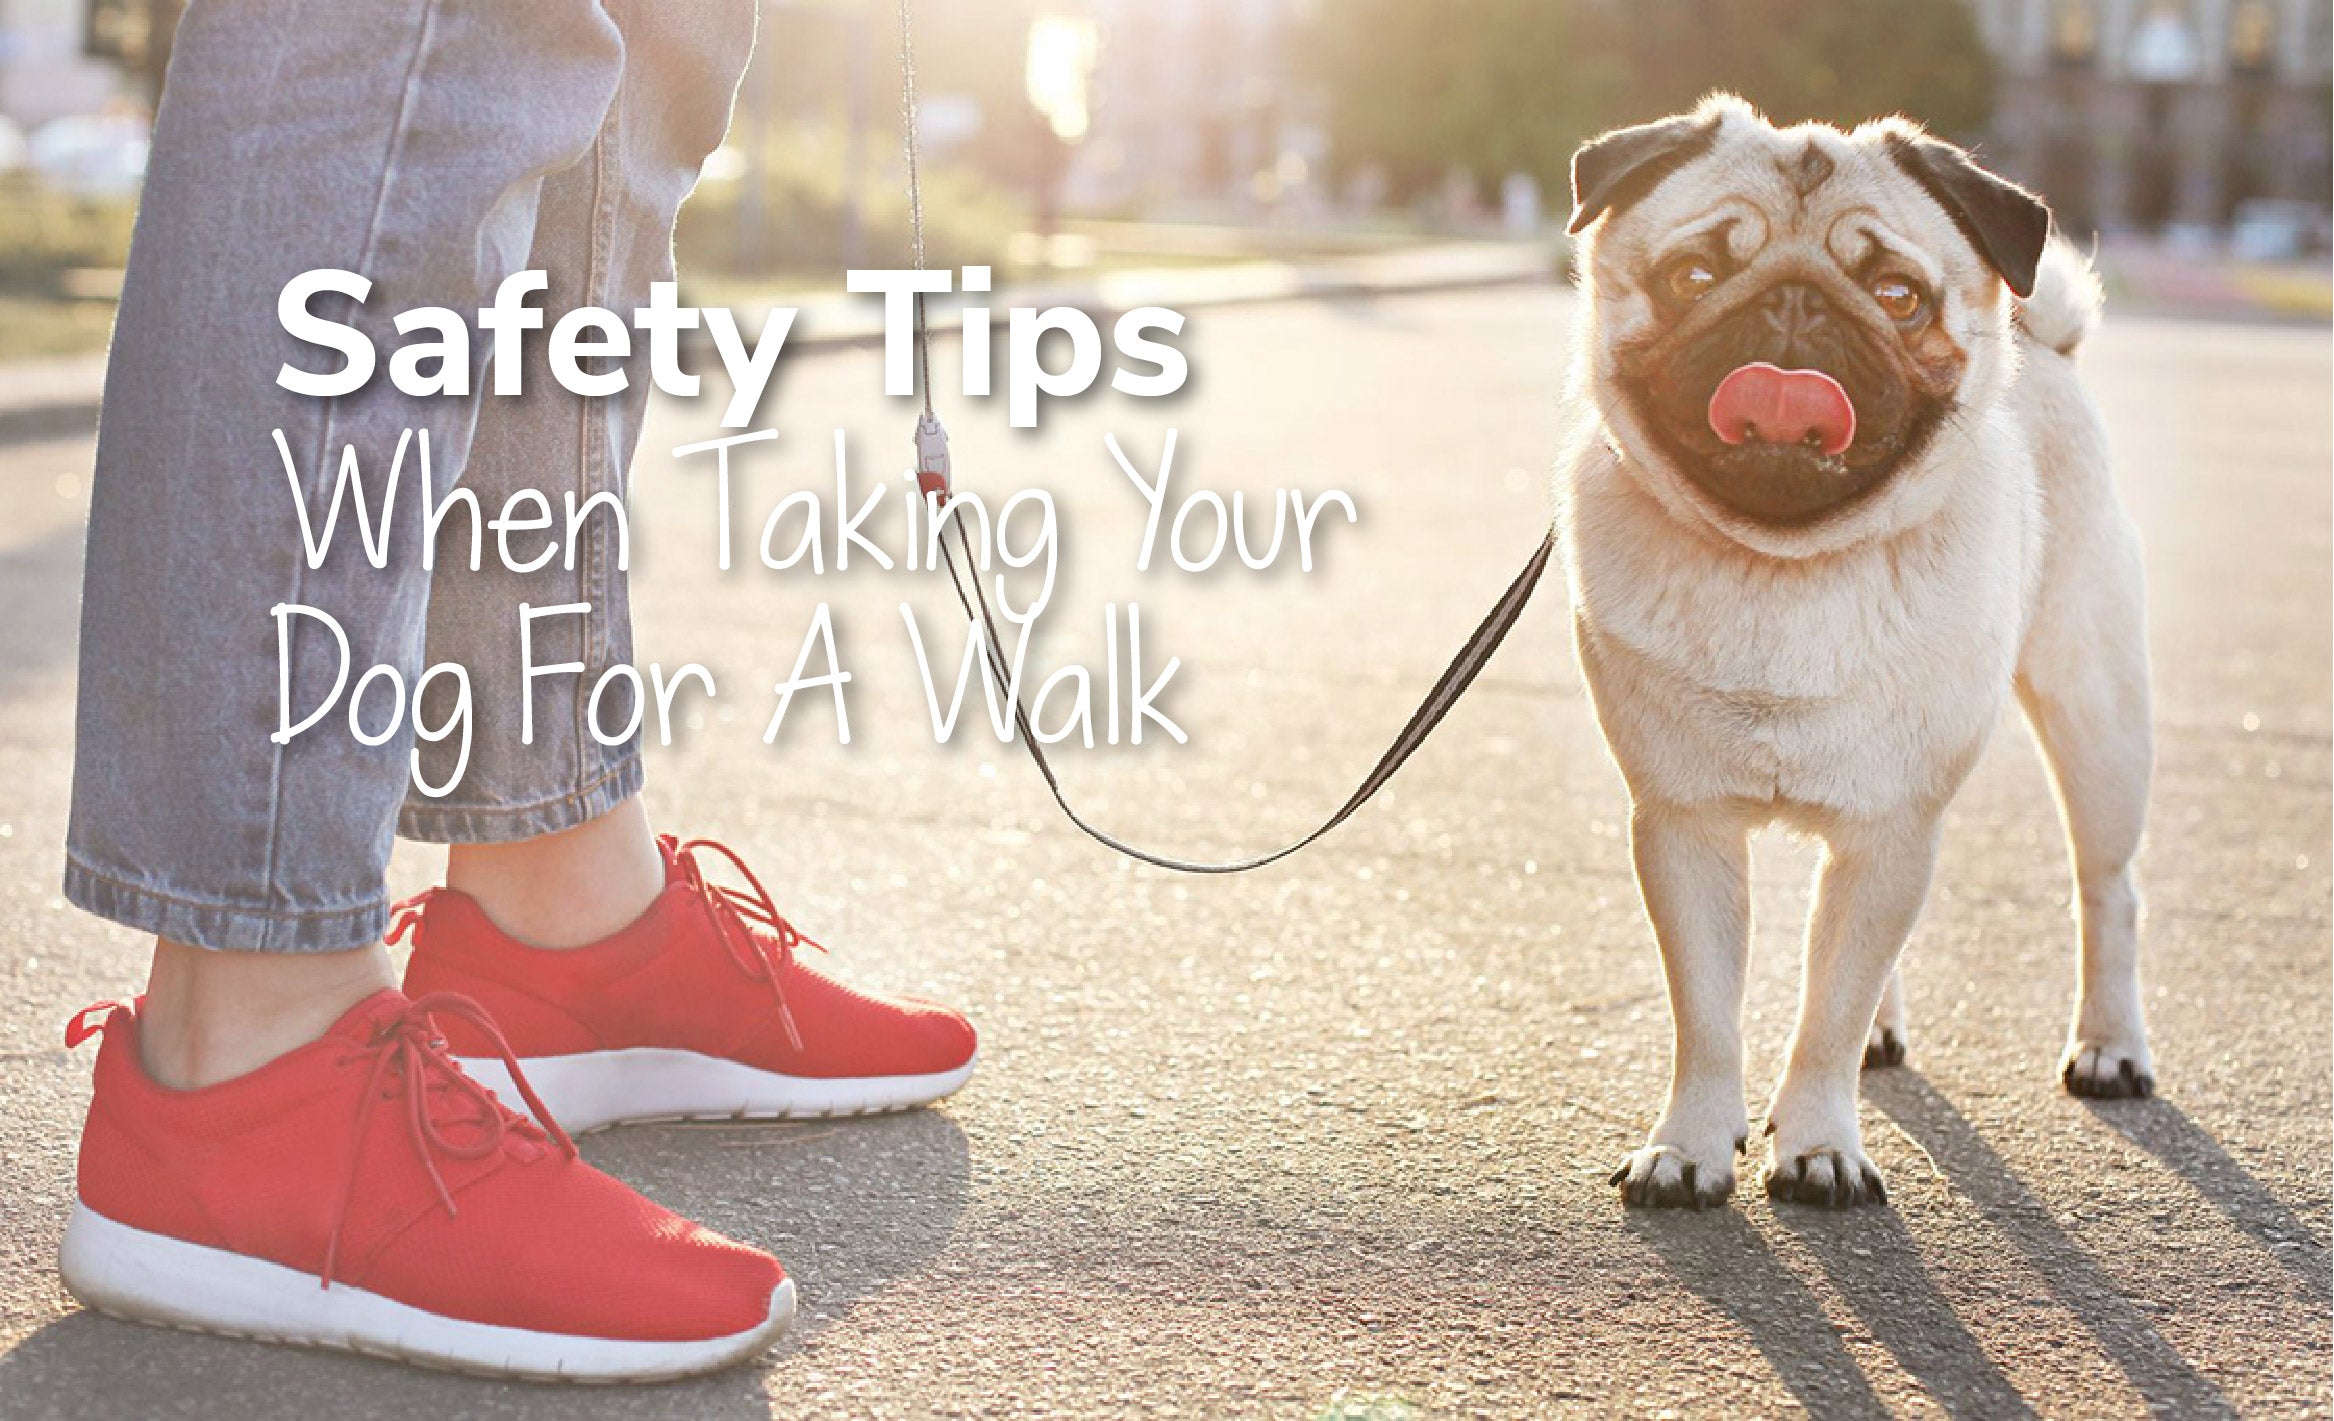 Safety Tips When Taking Your Dog For A Walk